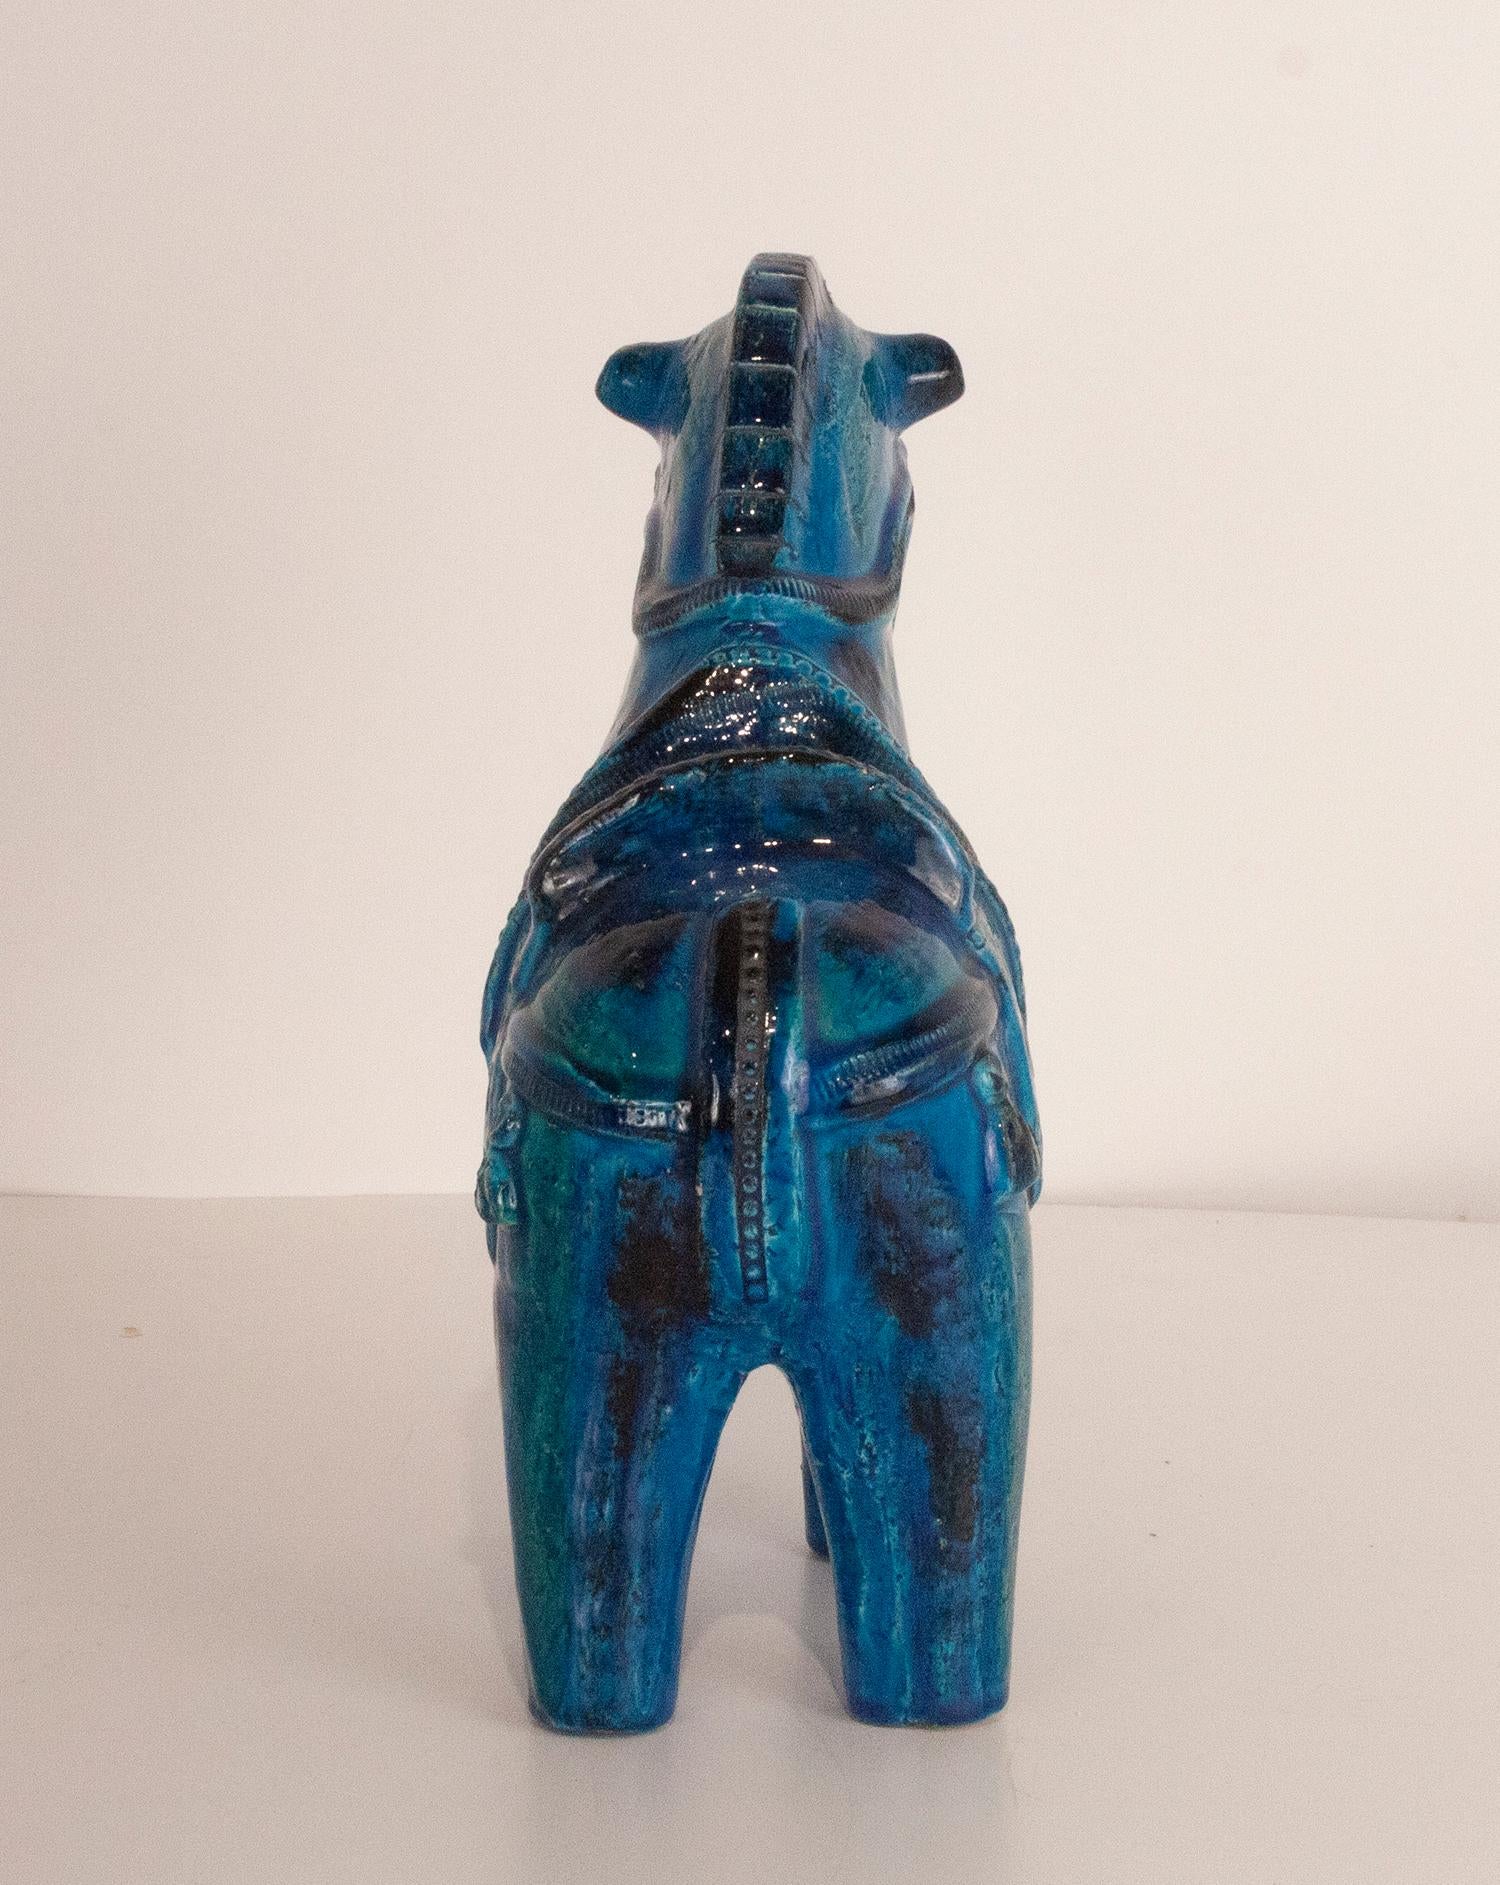 Rimini Blu glazed horse by Aldo Londi for Bitossi.
Large size, in very good condition.
Different shades of blues and greens.
A very decorative piece with a cheerful color.
Master Italian ceramist Aldo Londi created a range of decorative objects in